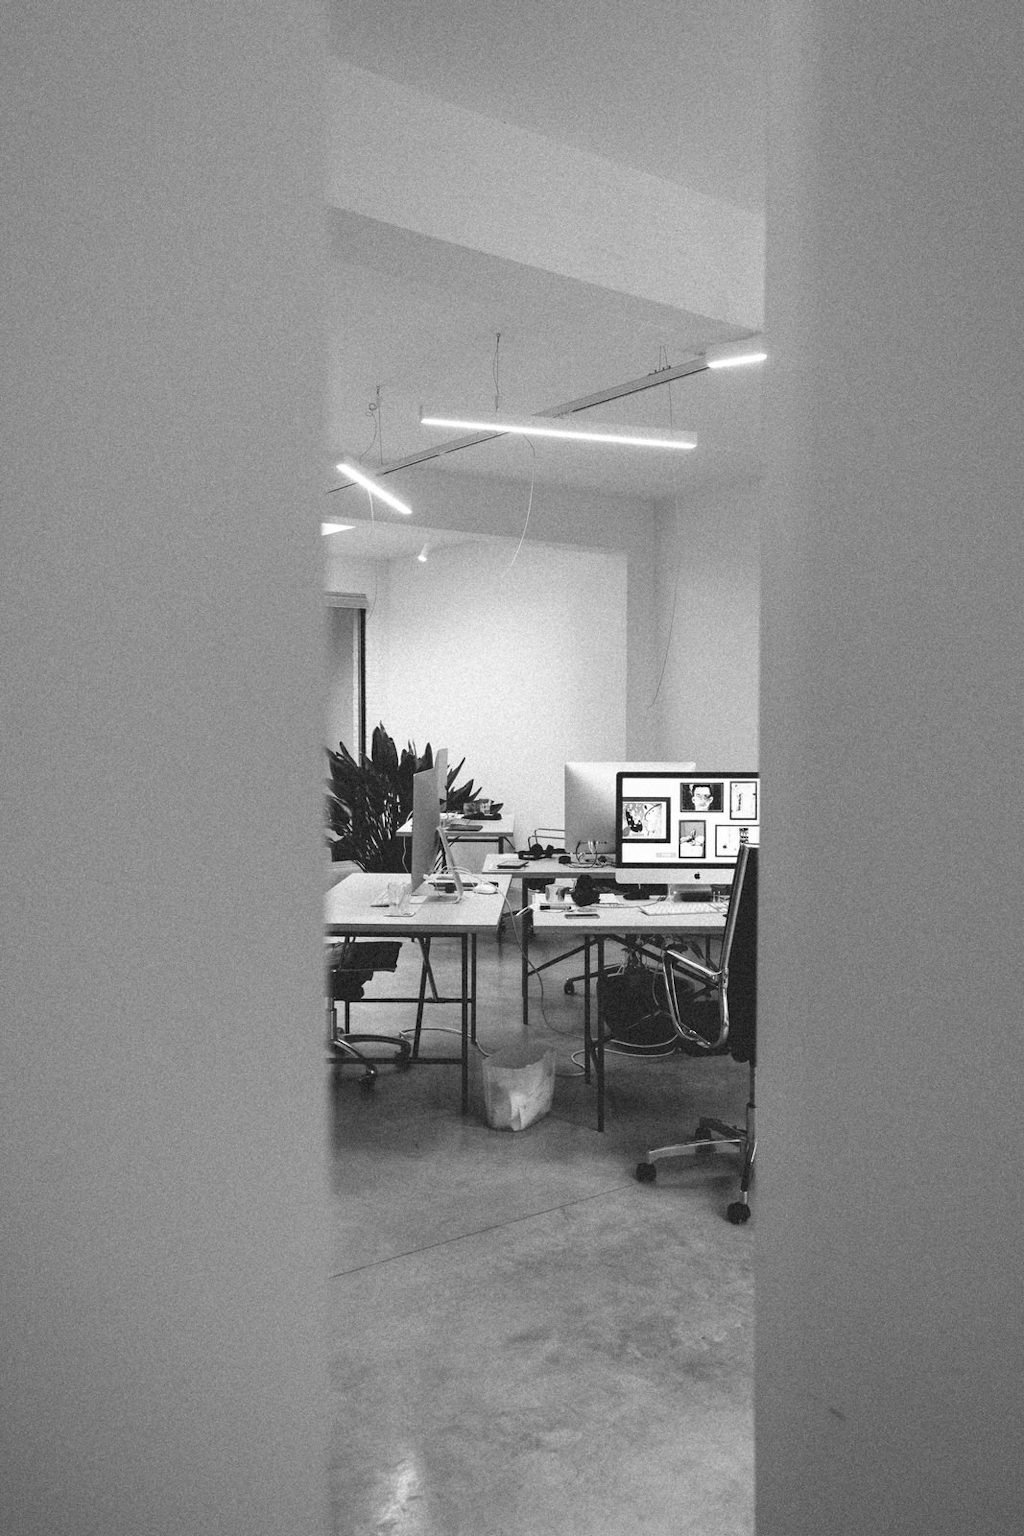 A view of our office, showing a few desks with computers on them.